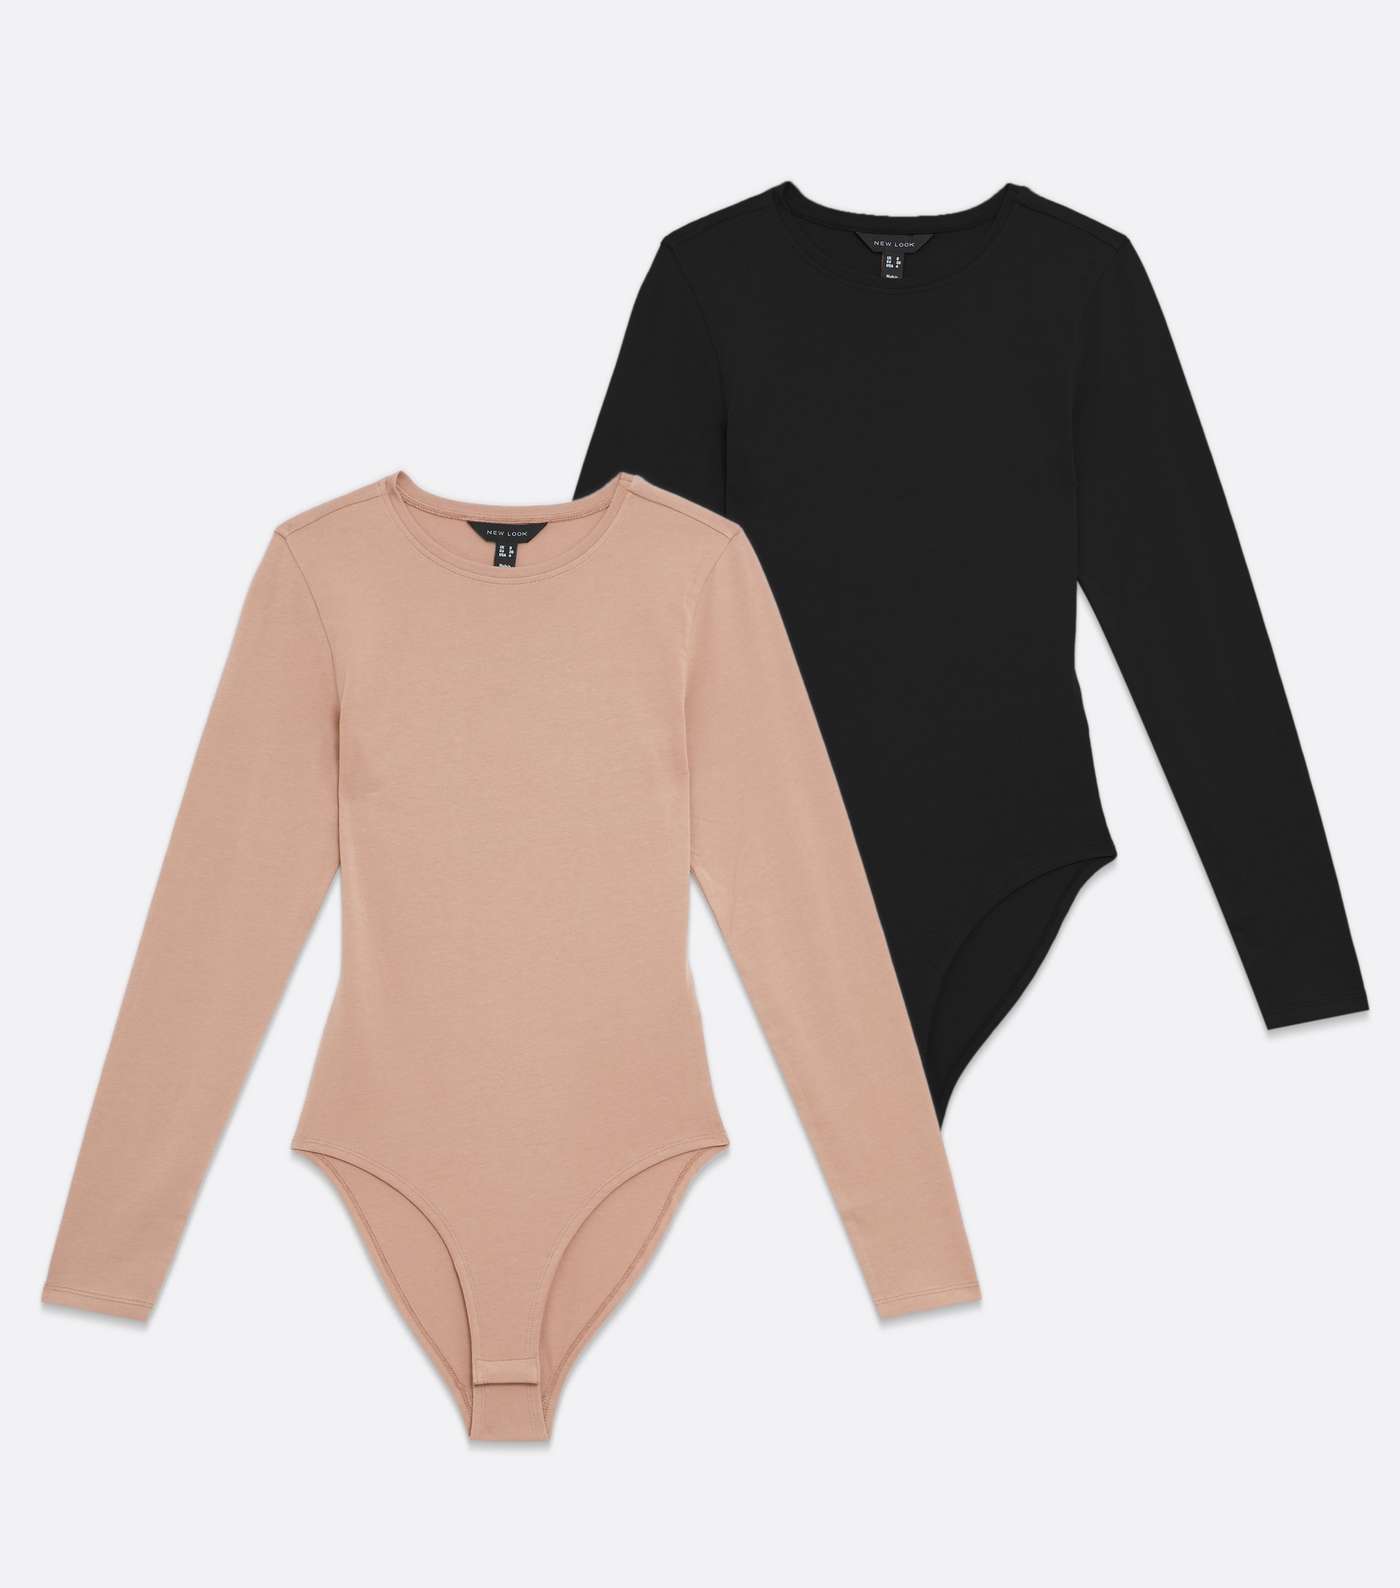 2 Pack Light Brown and Black Long Sleeve Bodysuits Image 5